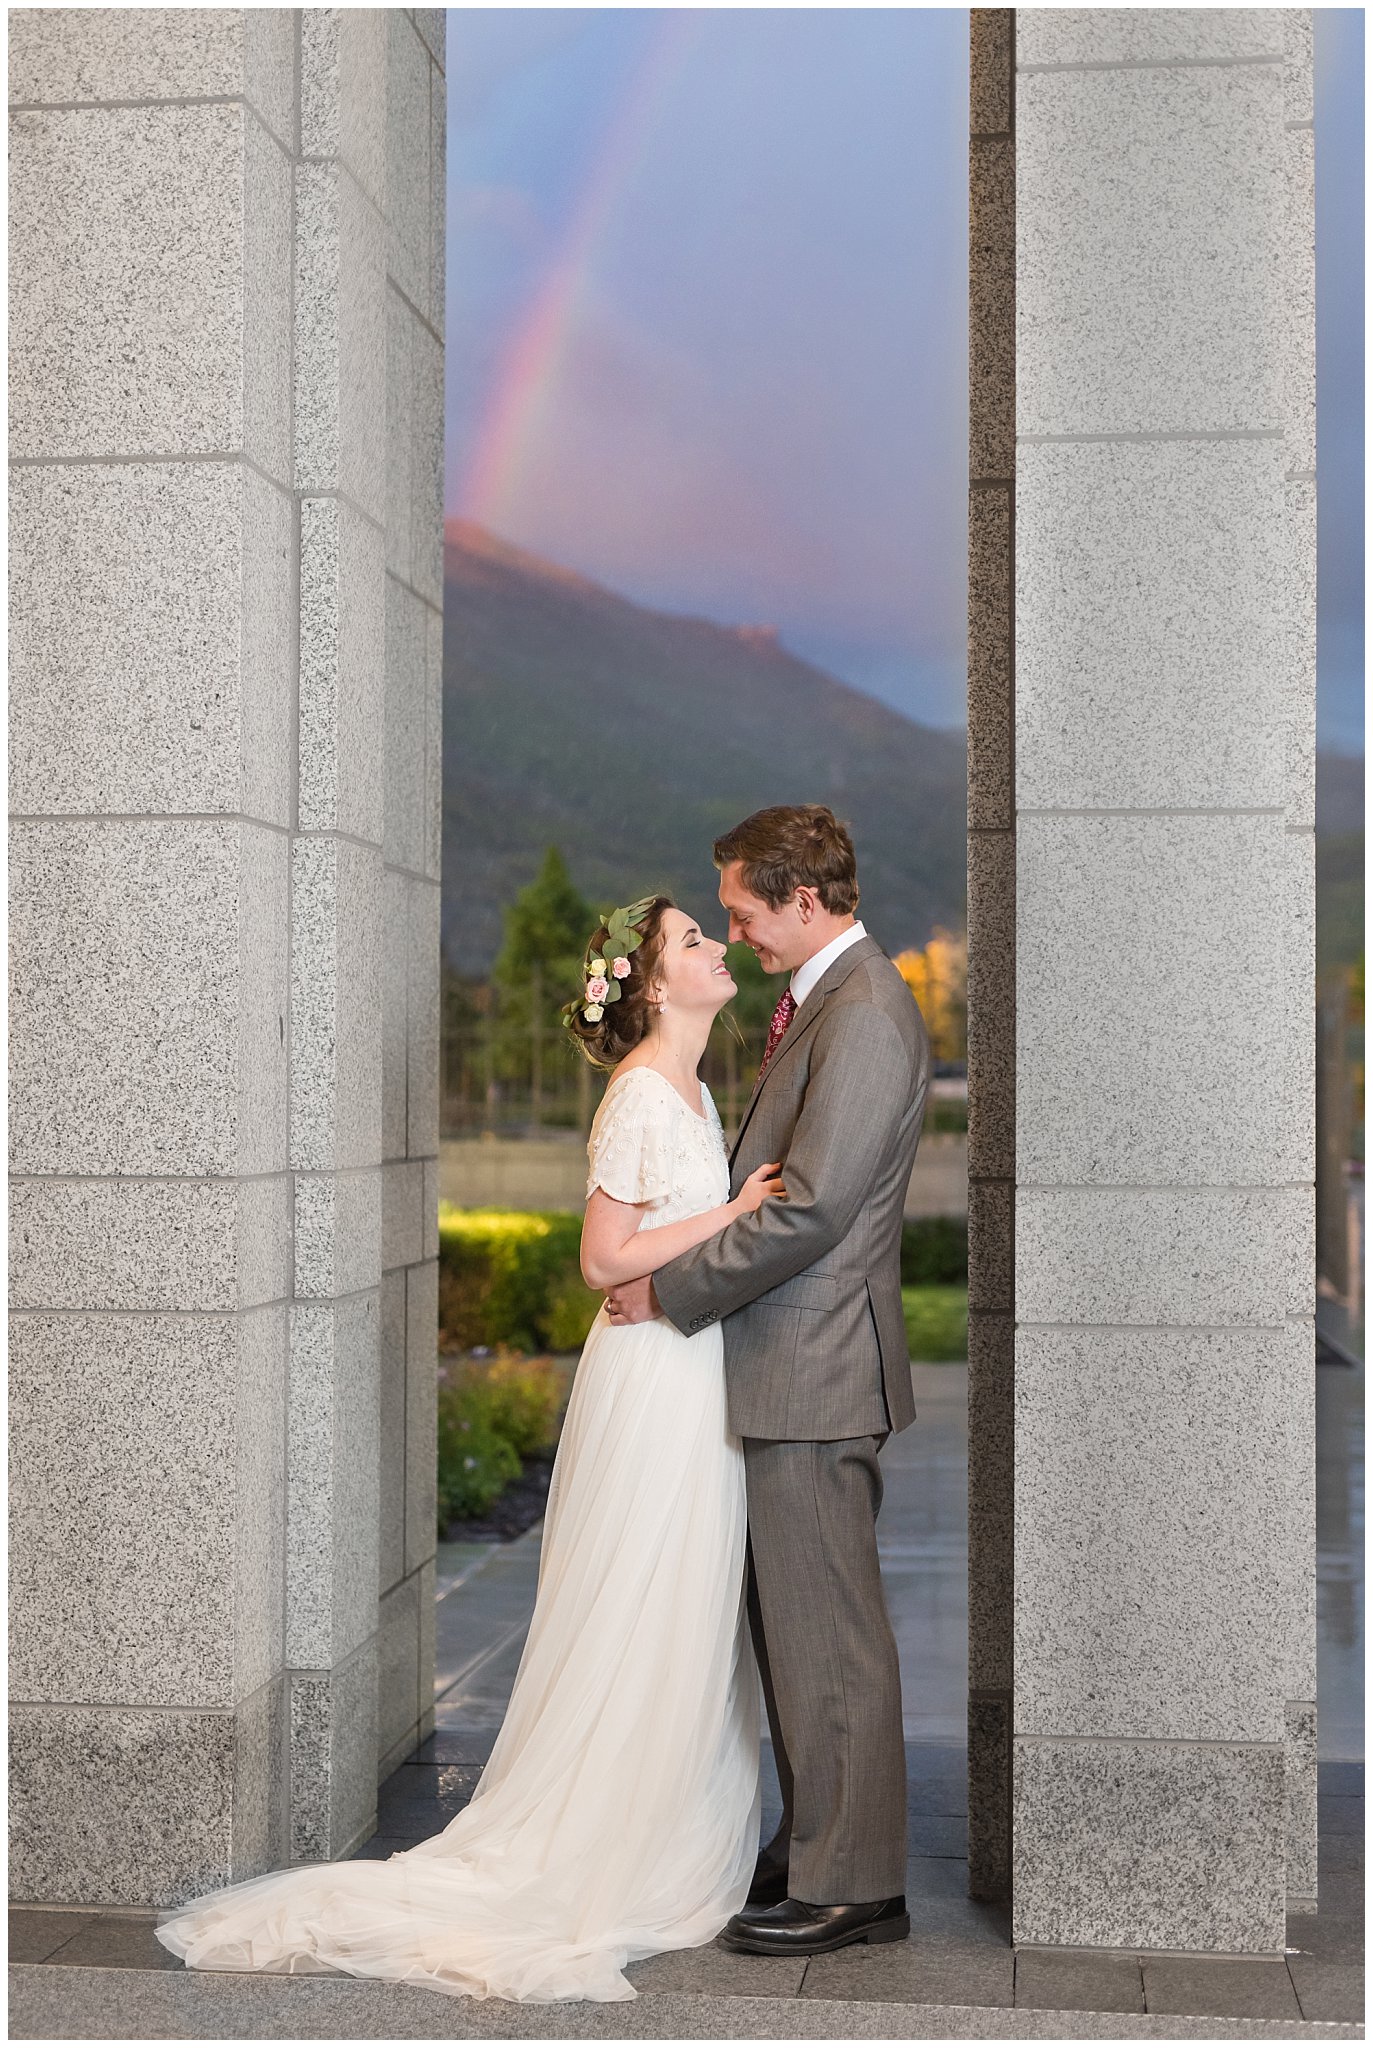 Rainbow during session with bride in flower crown and groom in grey suit with maroon tie | Grey, gold, and maroon wedding colors | Draper Temple Spring Formal Session | Jessie and Dallin Photography